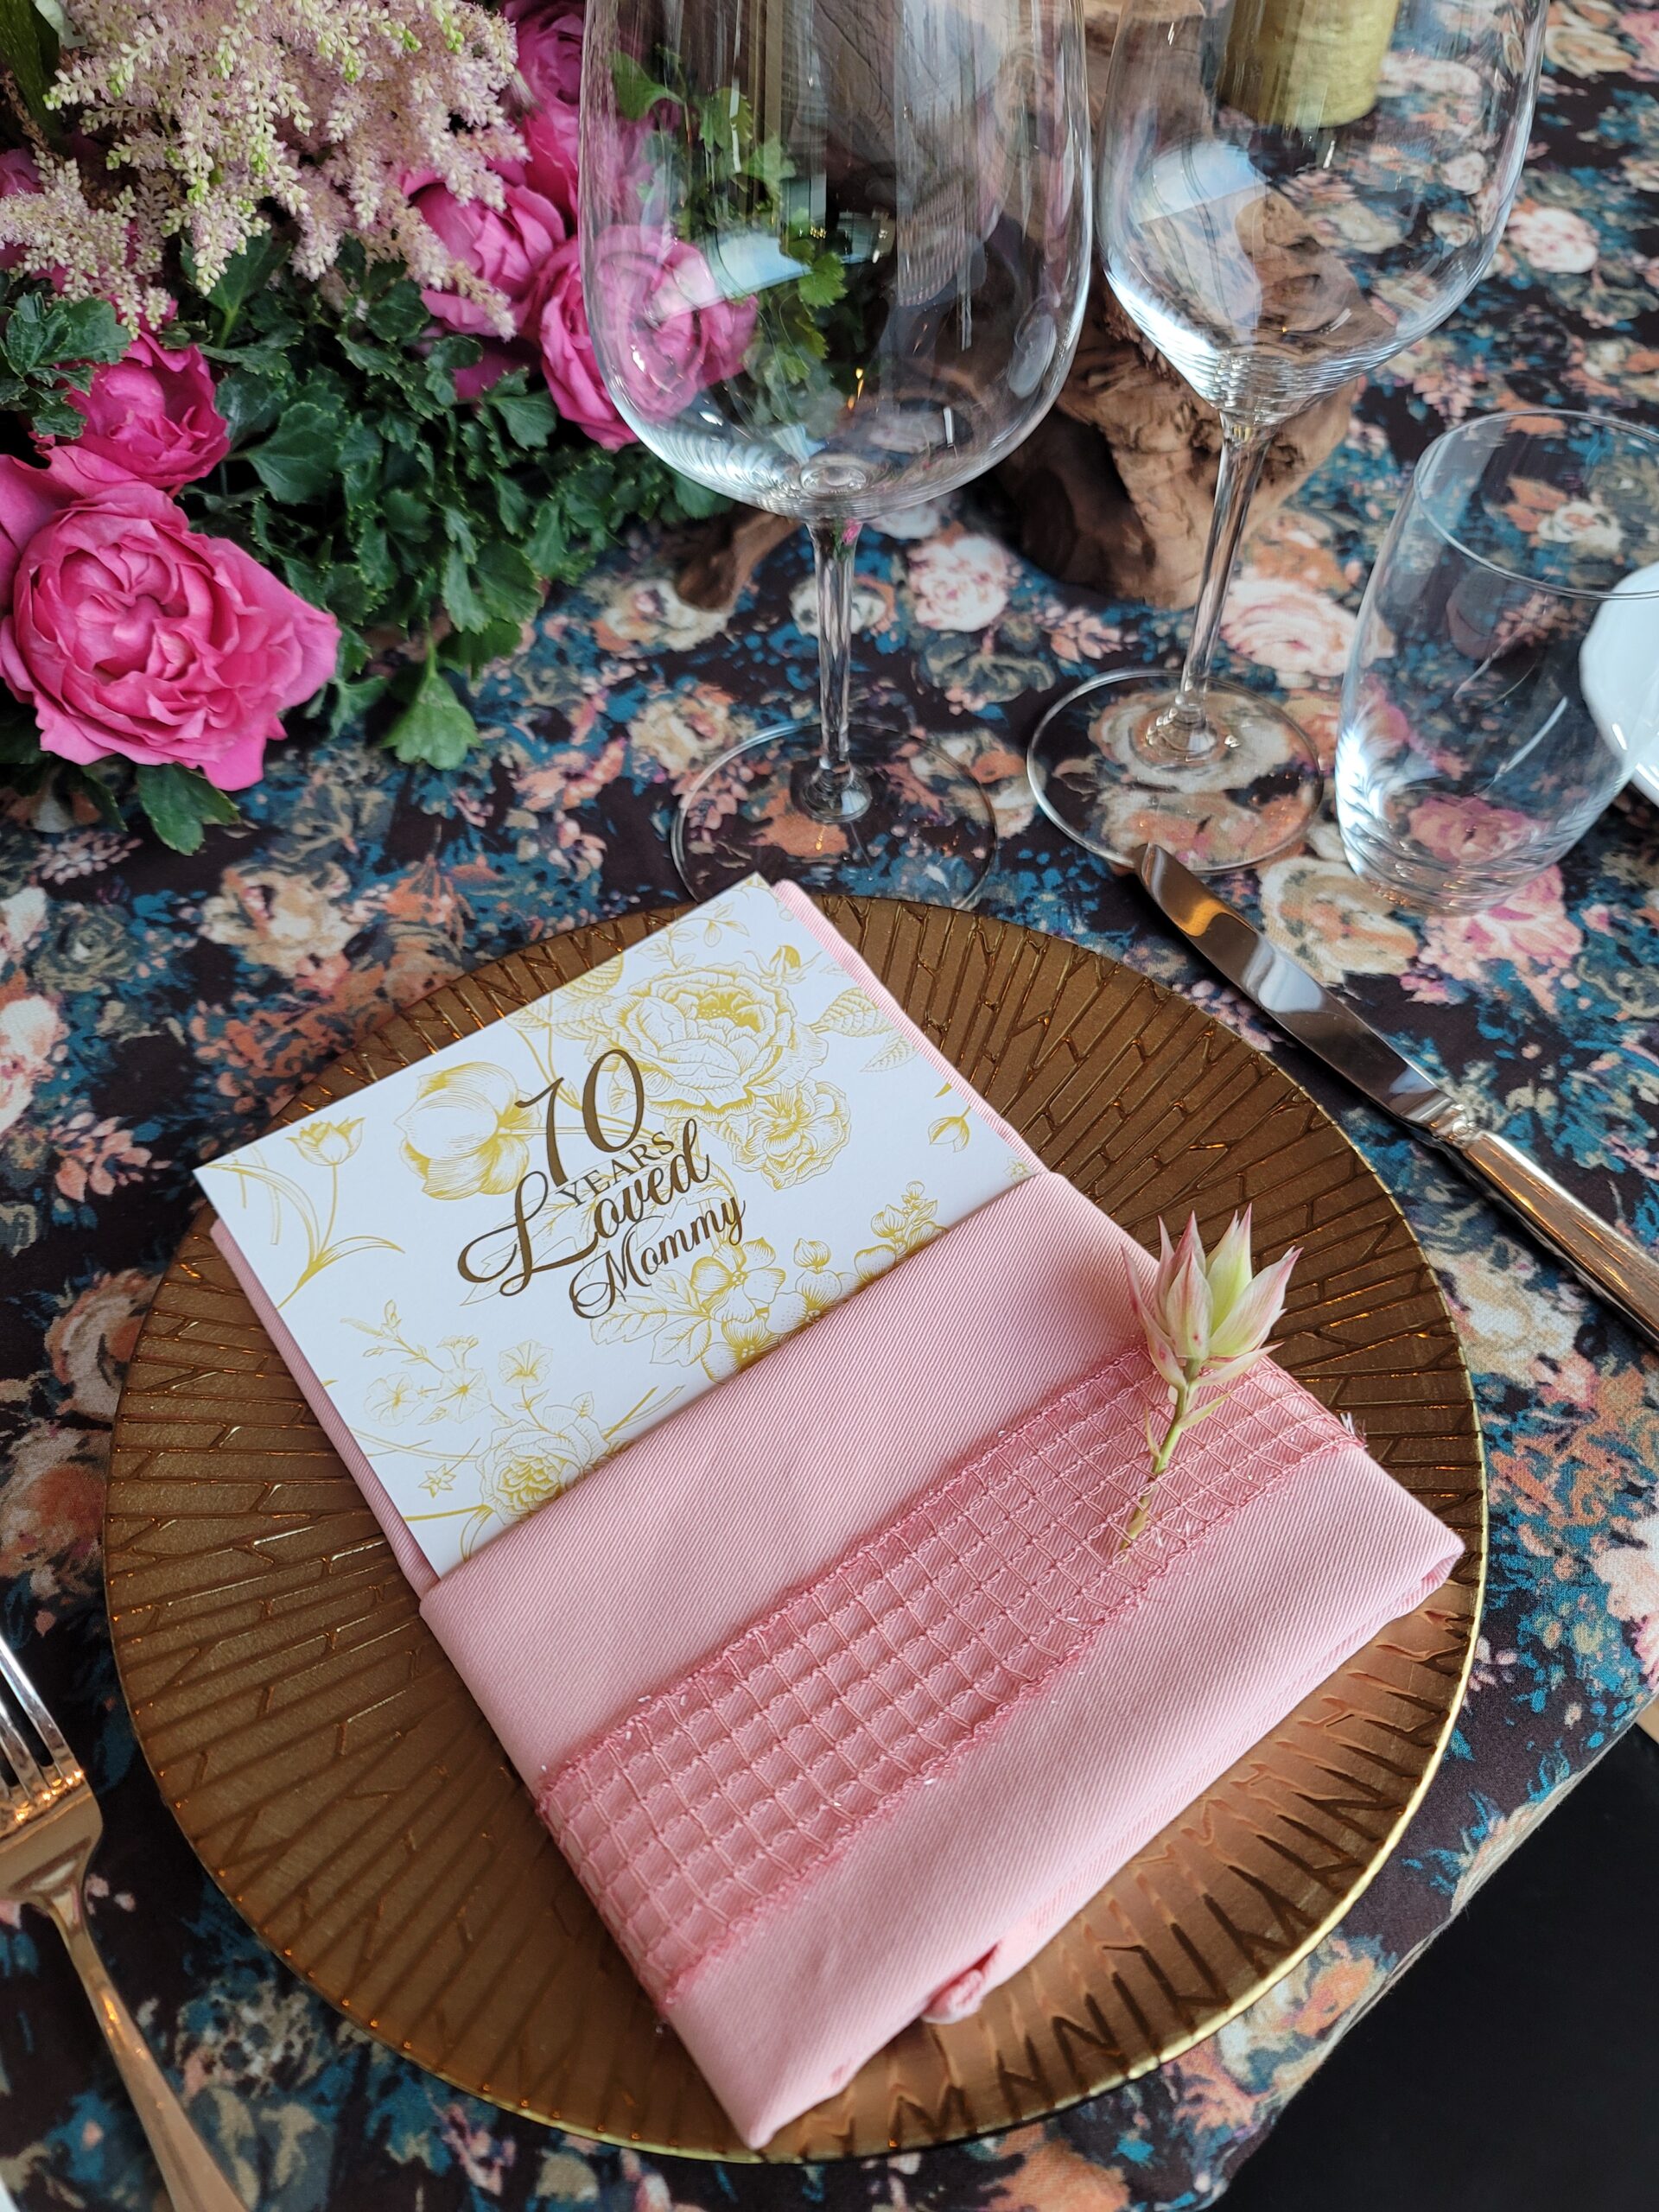 Elegant napkin fold adorned with a textured ribbon and delicate flowers, adding a personalized touch to a sophisticated table setting.